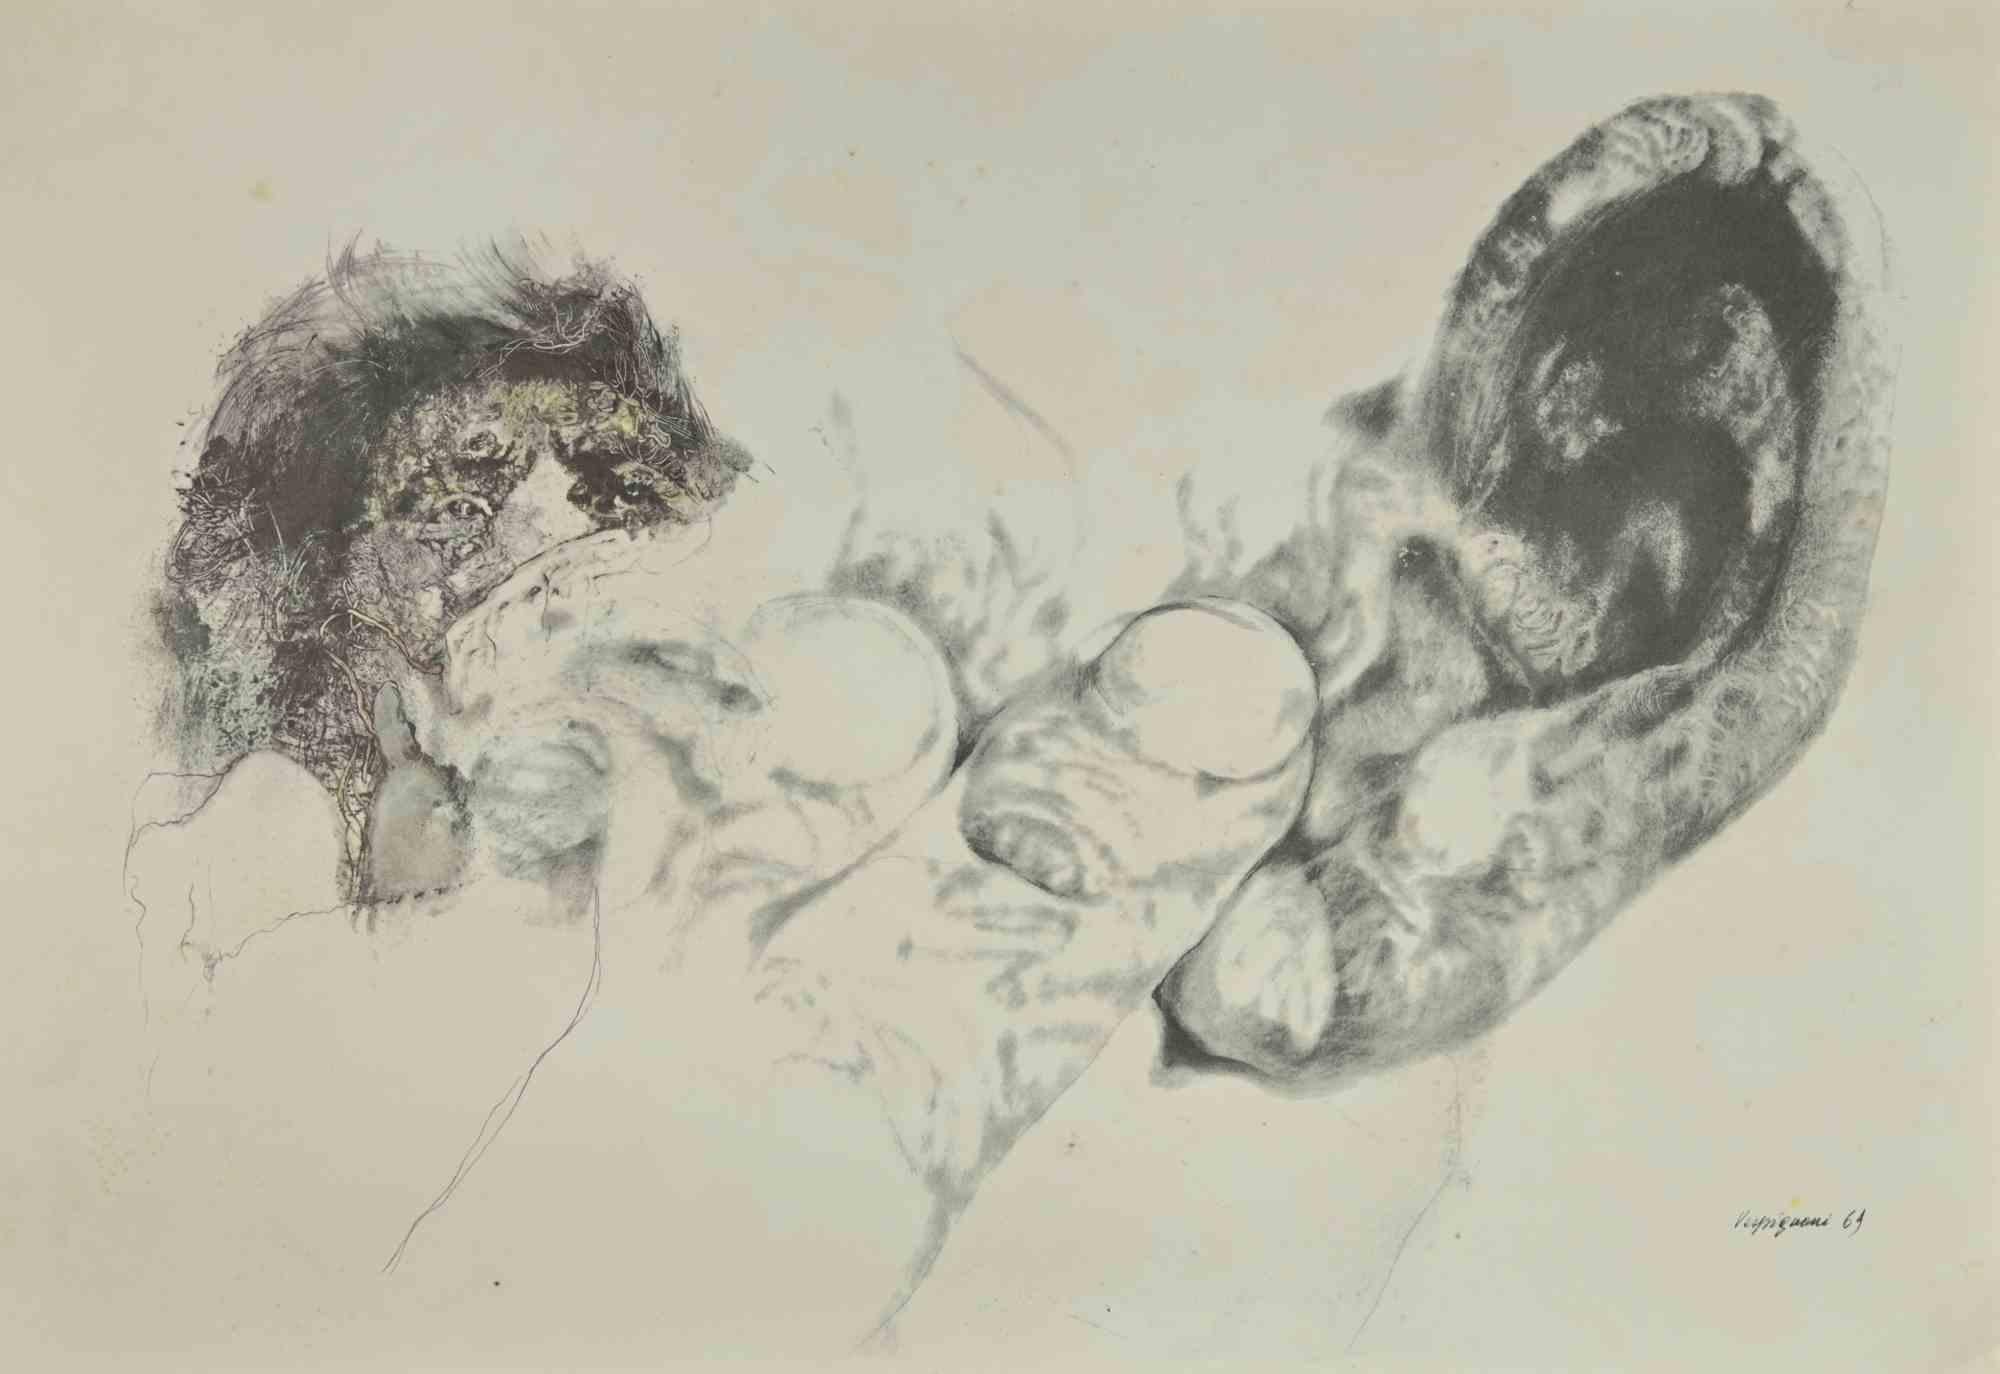 Portrait and Hand is a phototype print reproducing drawing by Renzo Vespignani of the 1960s

Signed on the plate lower right.

The artwork is depicted through strong strokes and perfect hatchings.